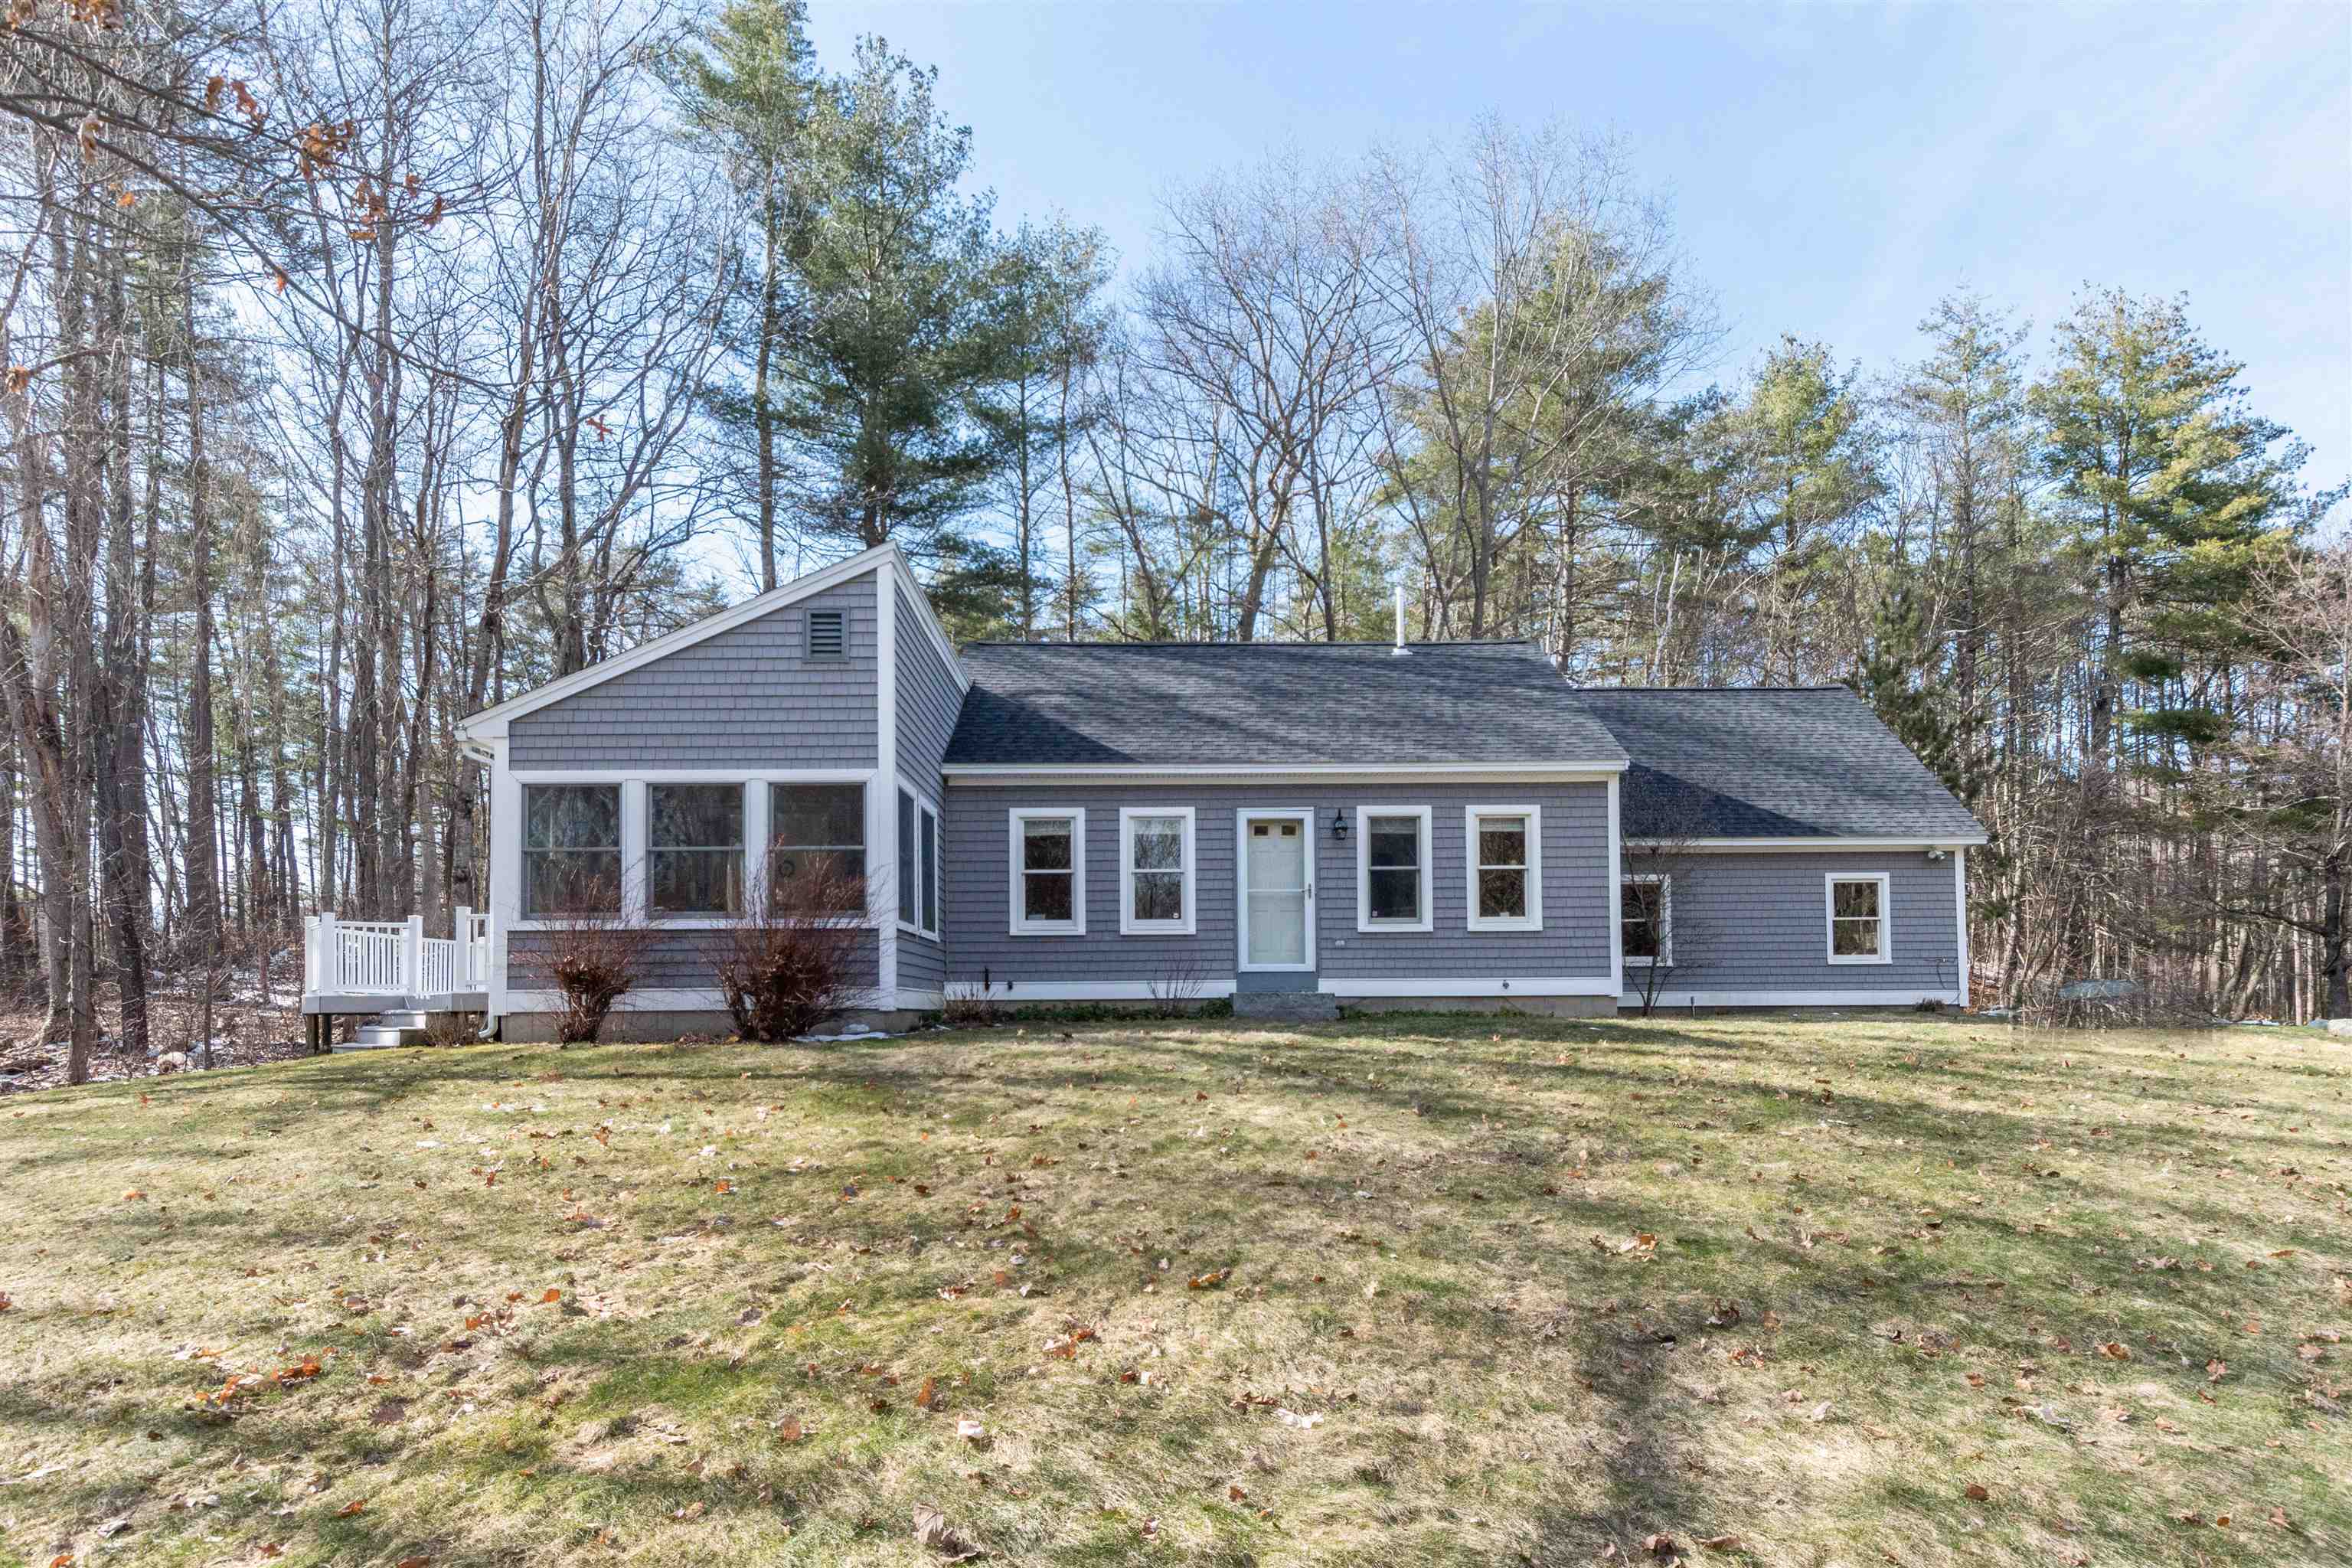 7A Stearns Road, Amherst, NH 03031